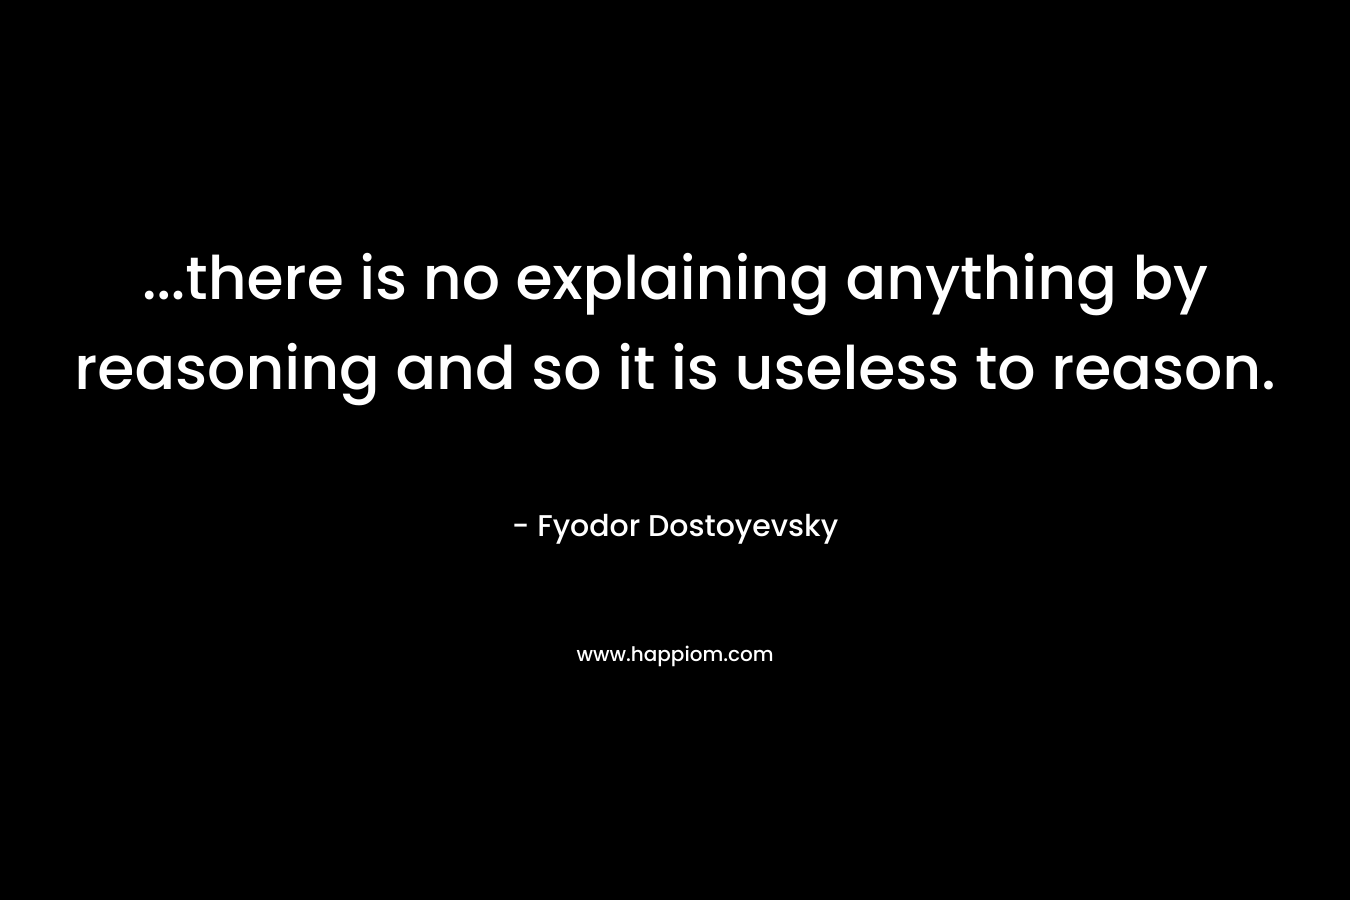 …there is no explaining anything by reasoning and so it is useless to reason. – Fyodor Dostoyevsky